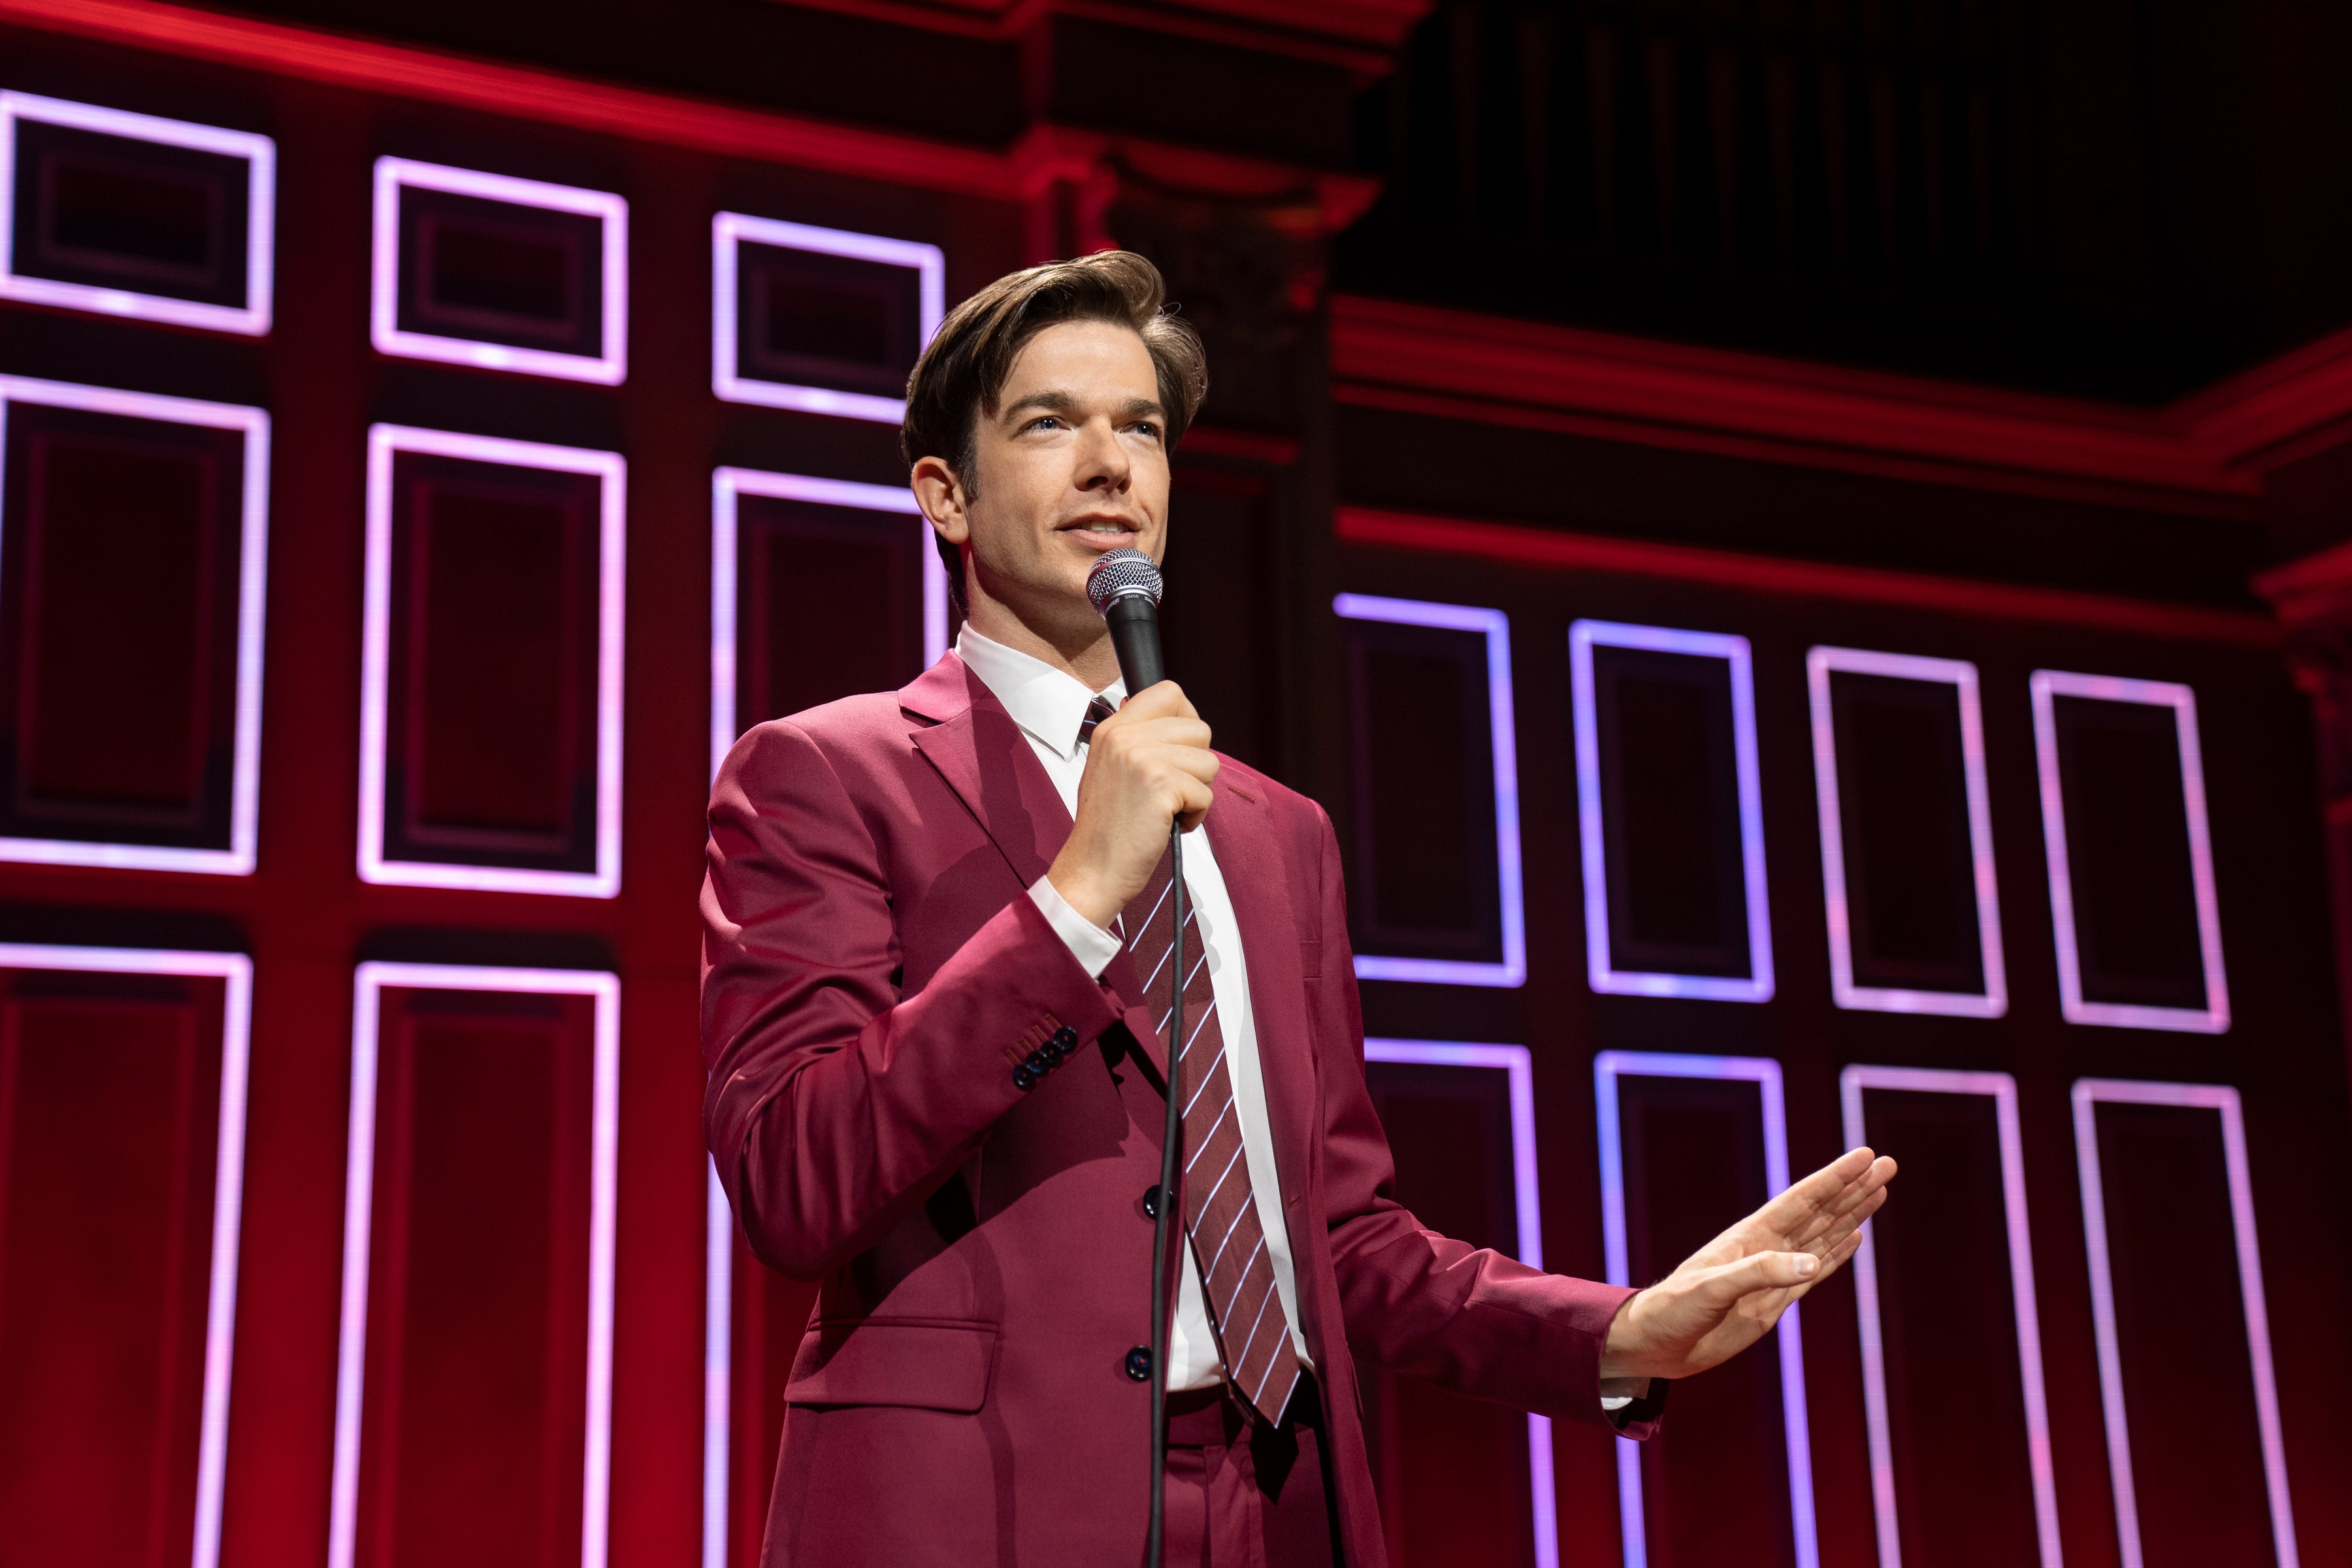 He stands on stage in a burgundy suit, his hair floppy. In his right hand, he holds a microphone. In his left, he holds up a hand, as if to say "wait a minute.“